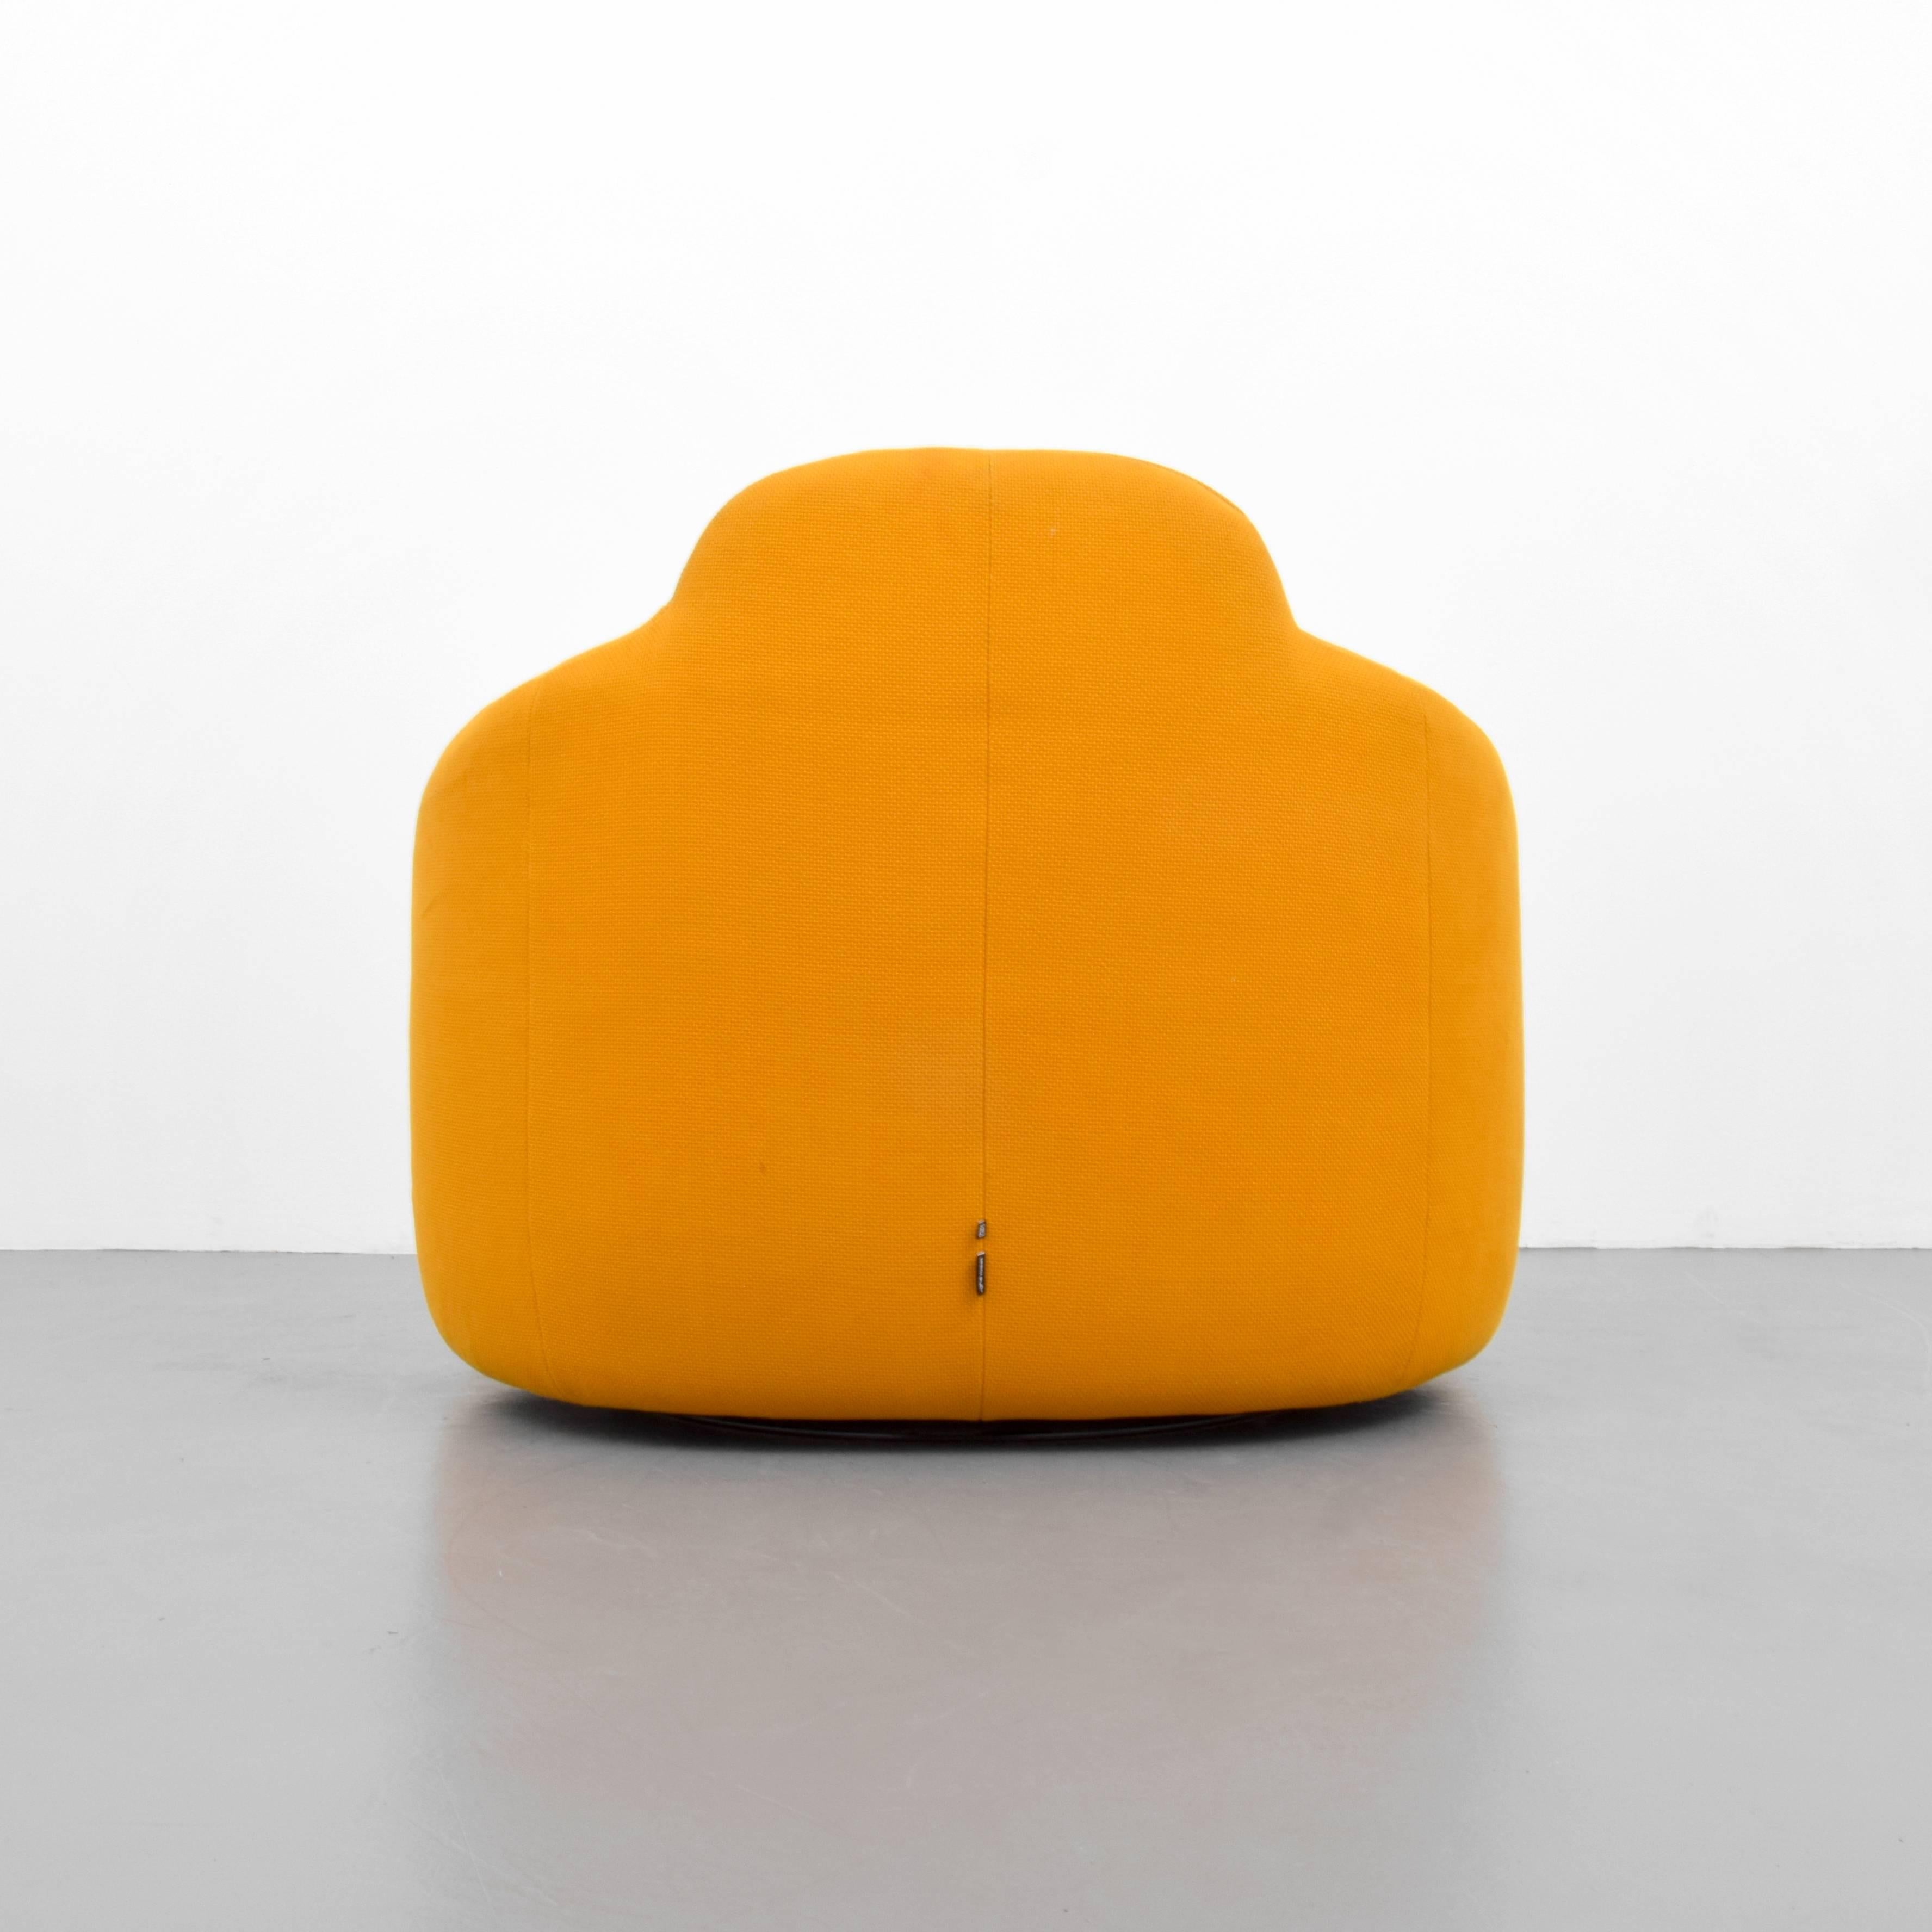 Lounge chair by Pierre Paulin. Additional Information: Reference: Paulin, Centre Pompidou, pg. 96. We have a yellow chair available also, please see 1stdibs listing.

Markings: Ligne Roset label.
 